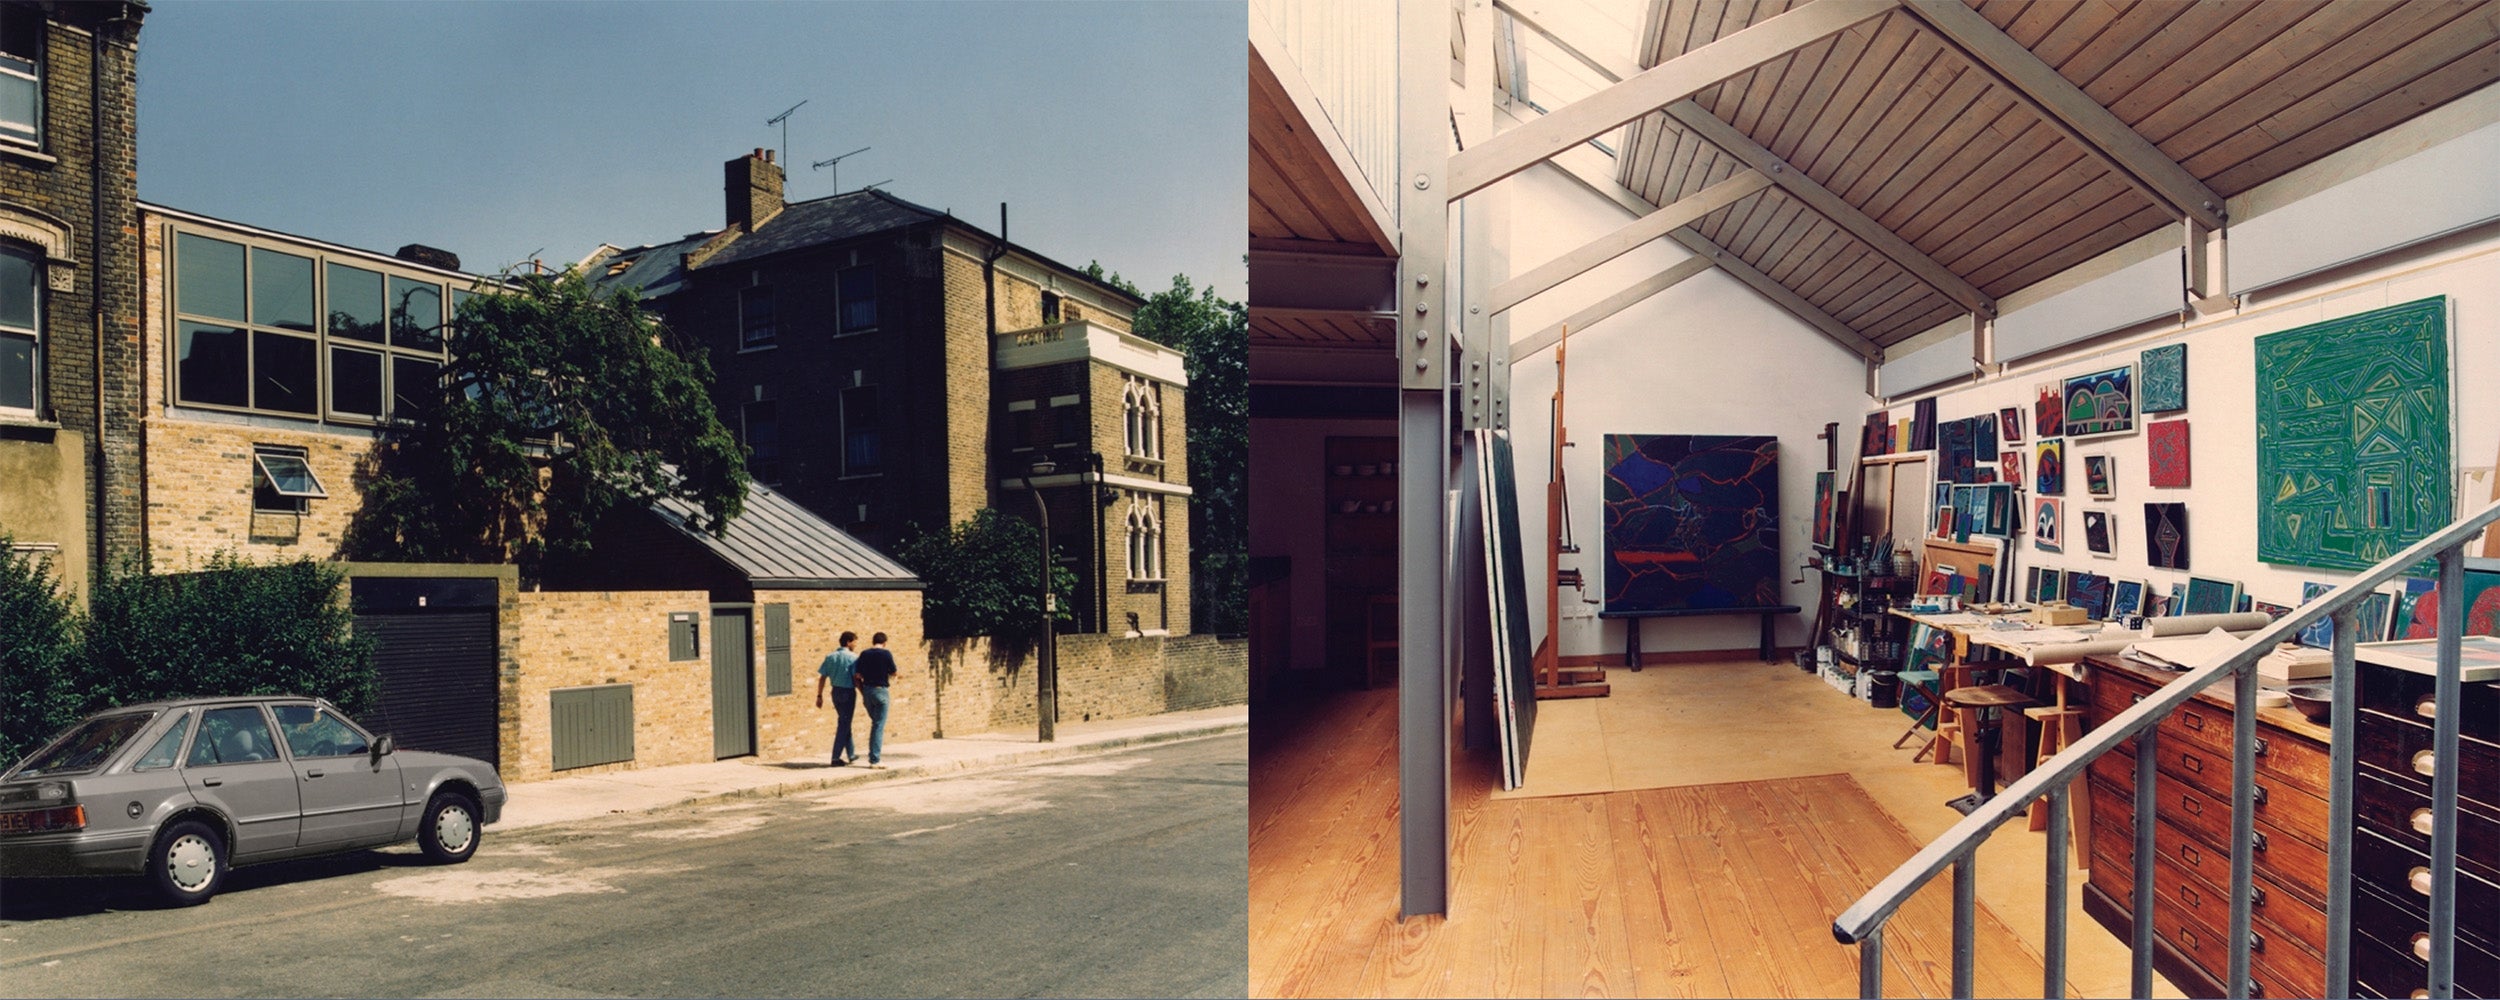 House’s studio designed by MJ Long, joint architect of the British Library, National Maritime Museum in Falmouth, Pallant House’s new wing extension, and numerous artist studios, including Frank Auerbach, R.B. Kitaj, and Peter Blake